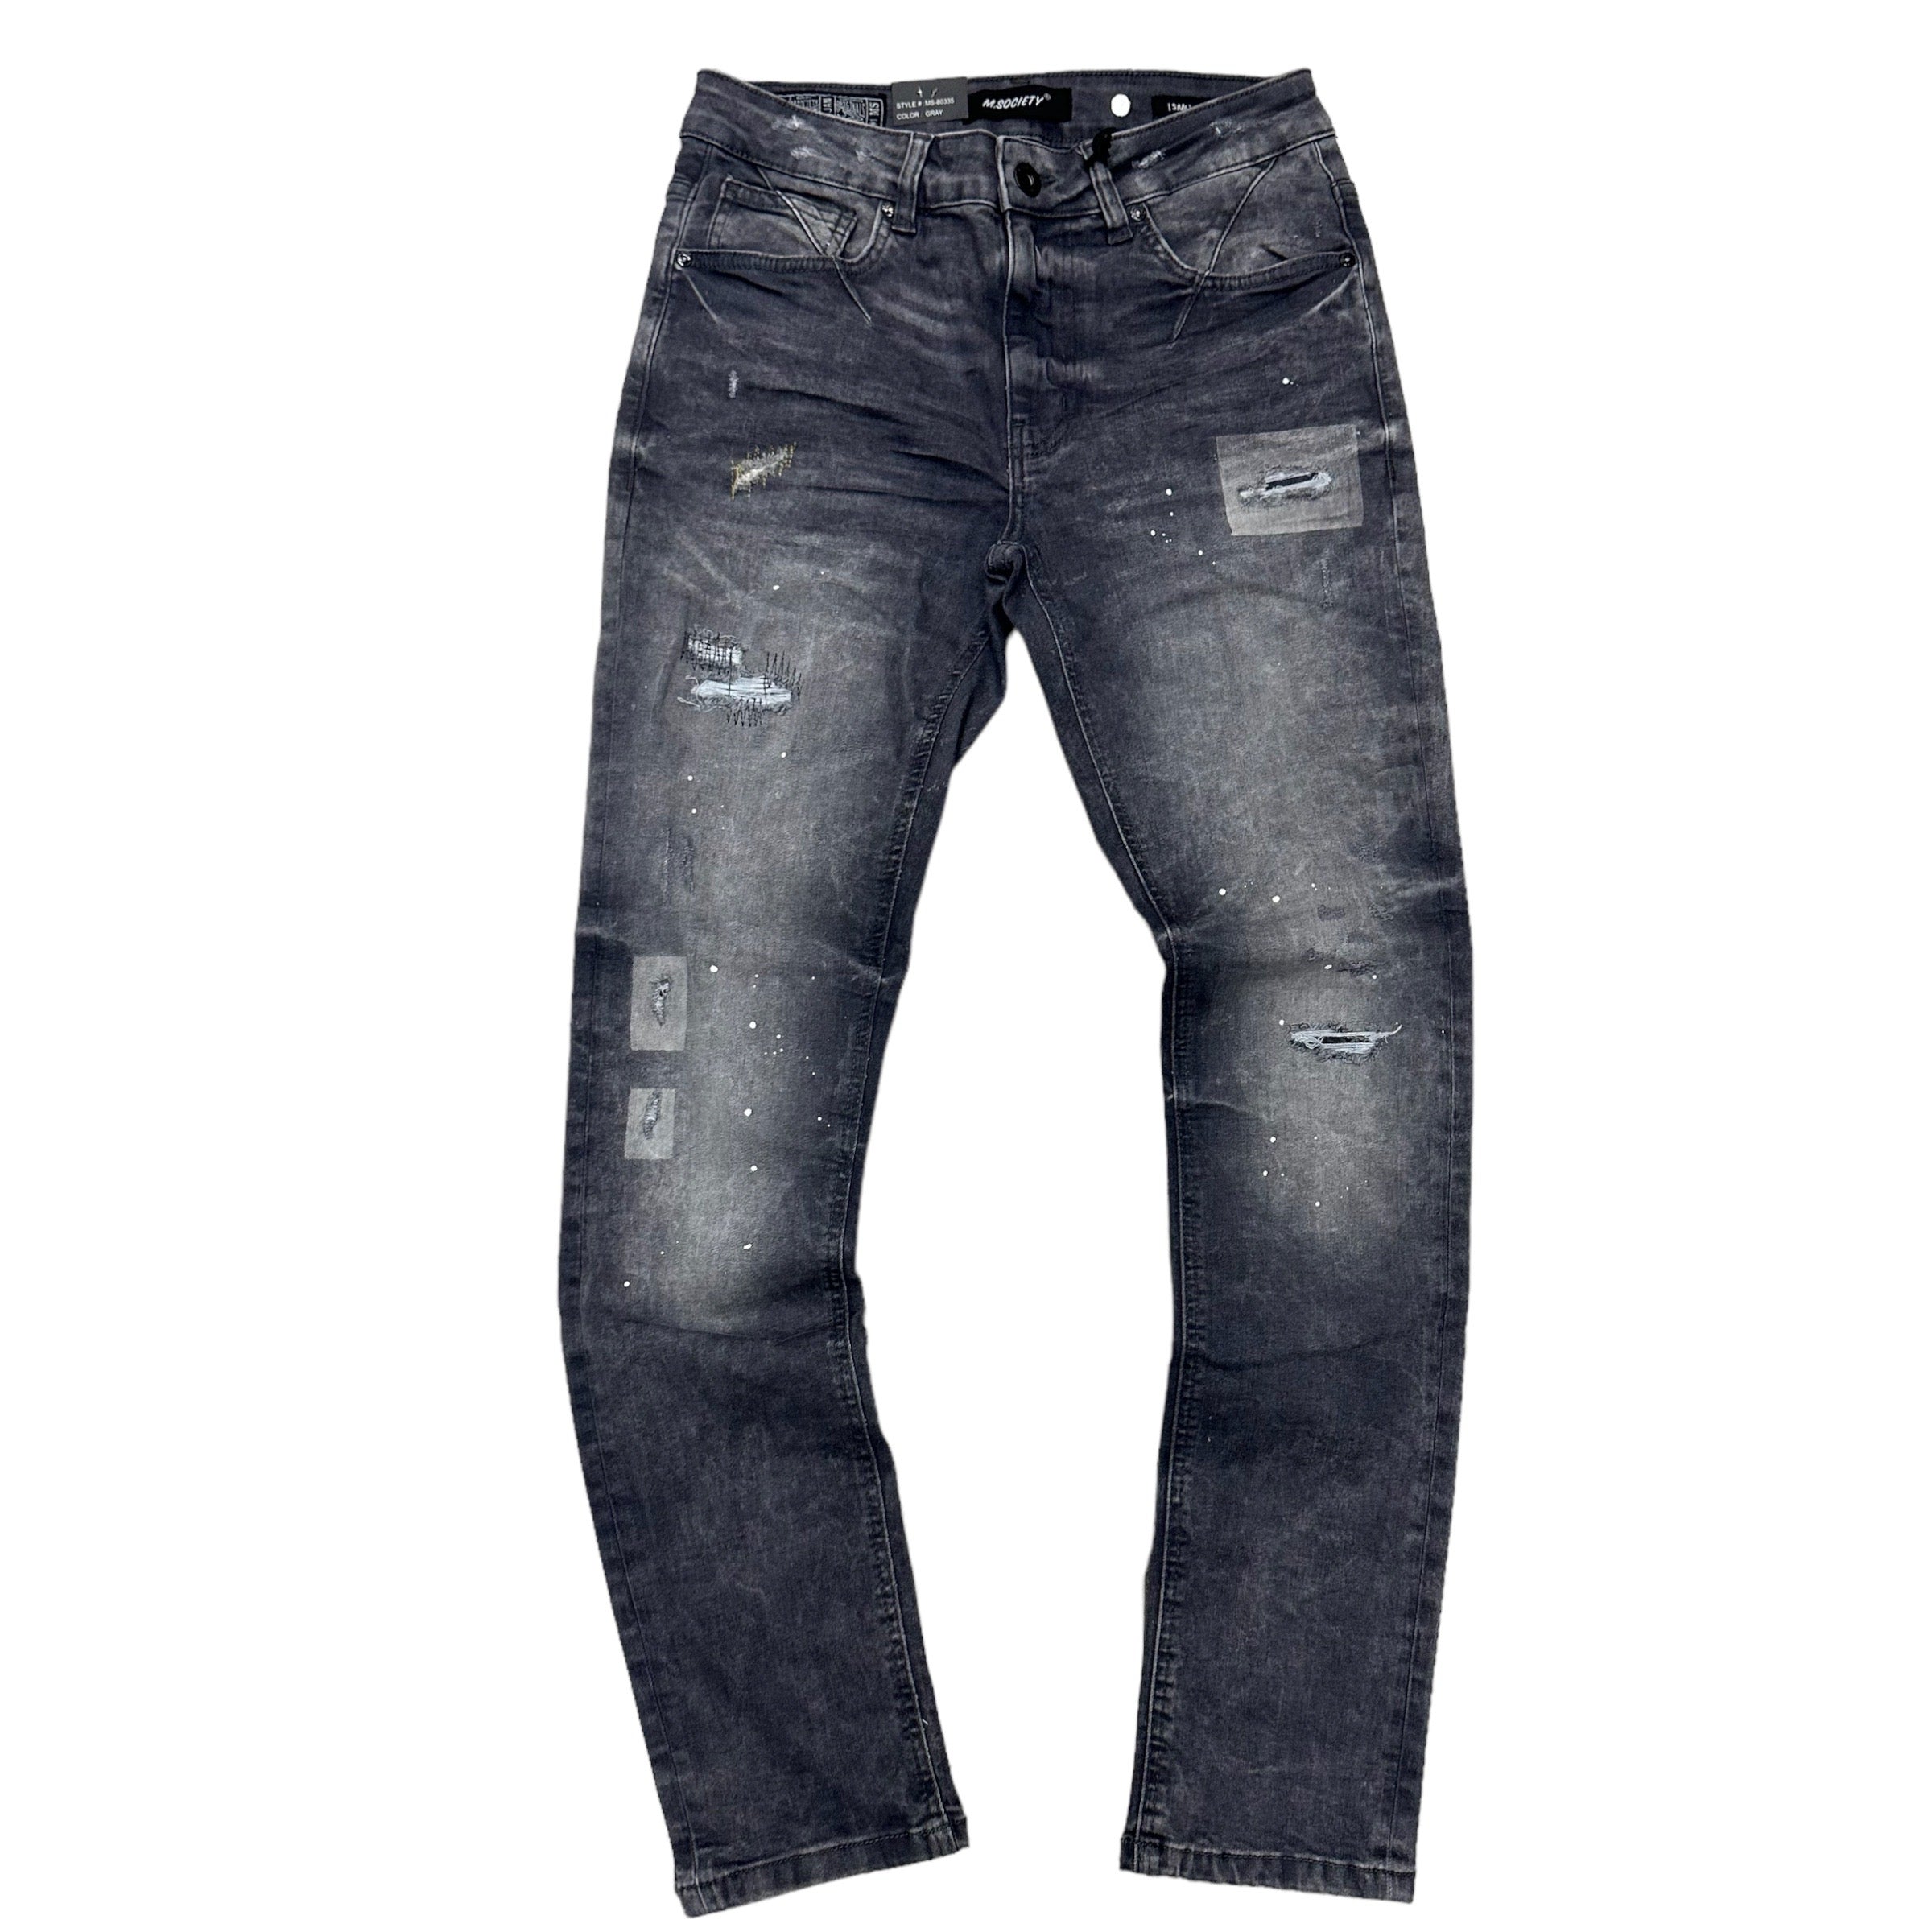 Mischief Faded Slim Fit Jeans Grey 80335